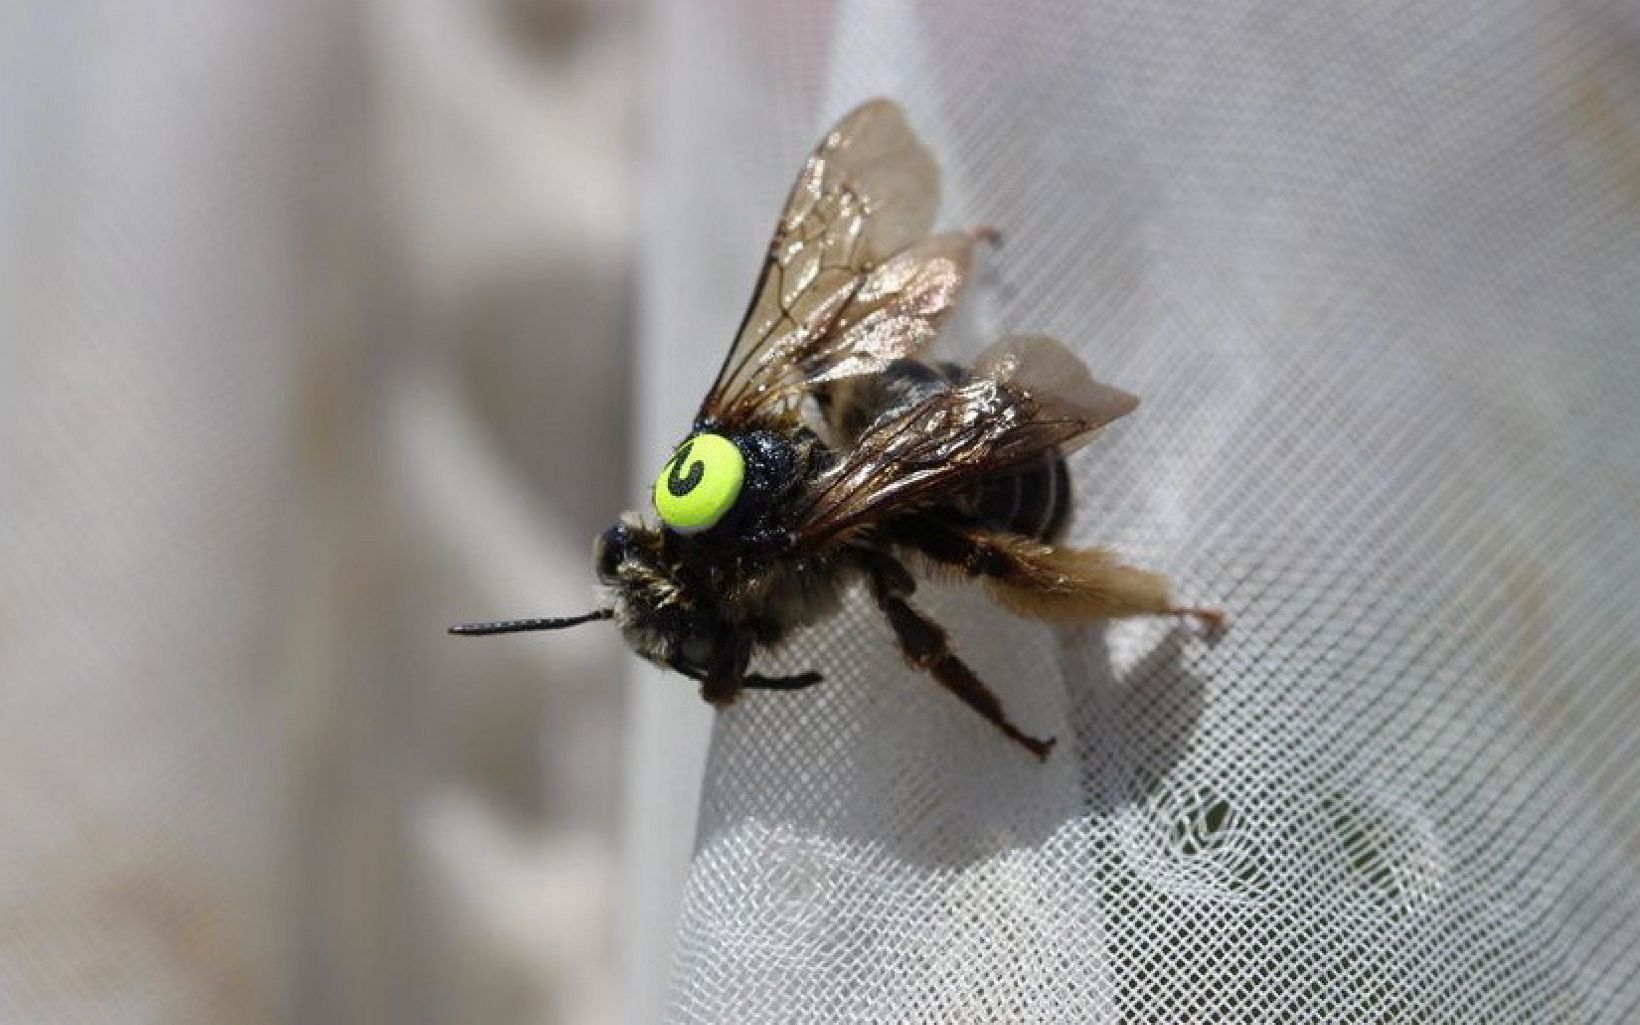 The Melissodes boltoniae is long-horned bee that does not have a common name. This bee has been fitted with a paper tag for Shelly Wiggam's research on solitary bees.